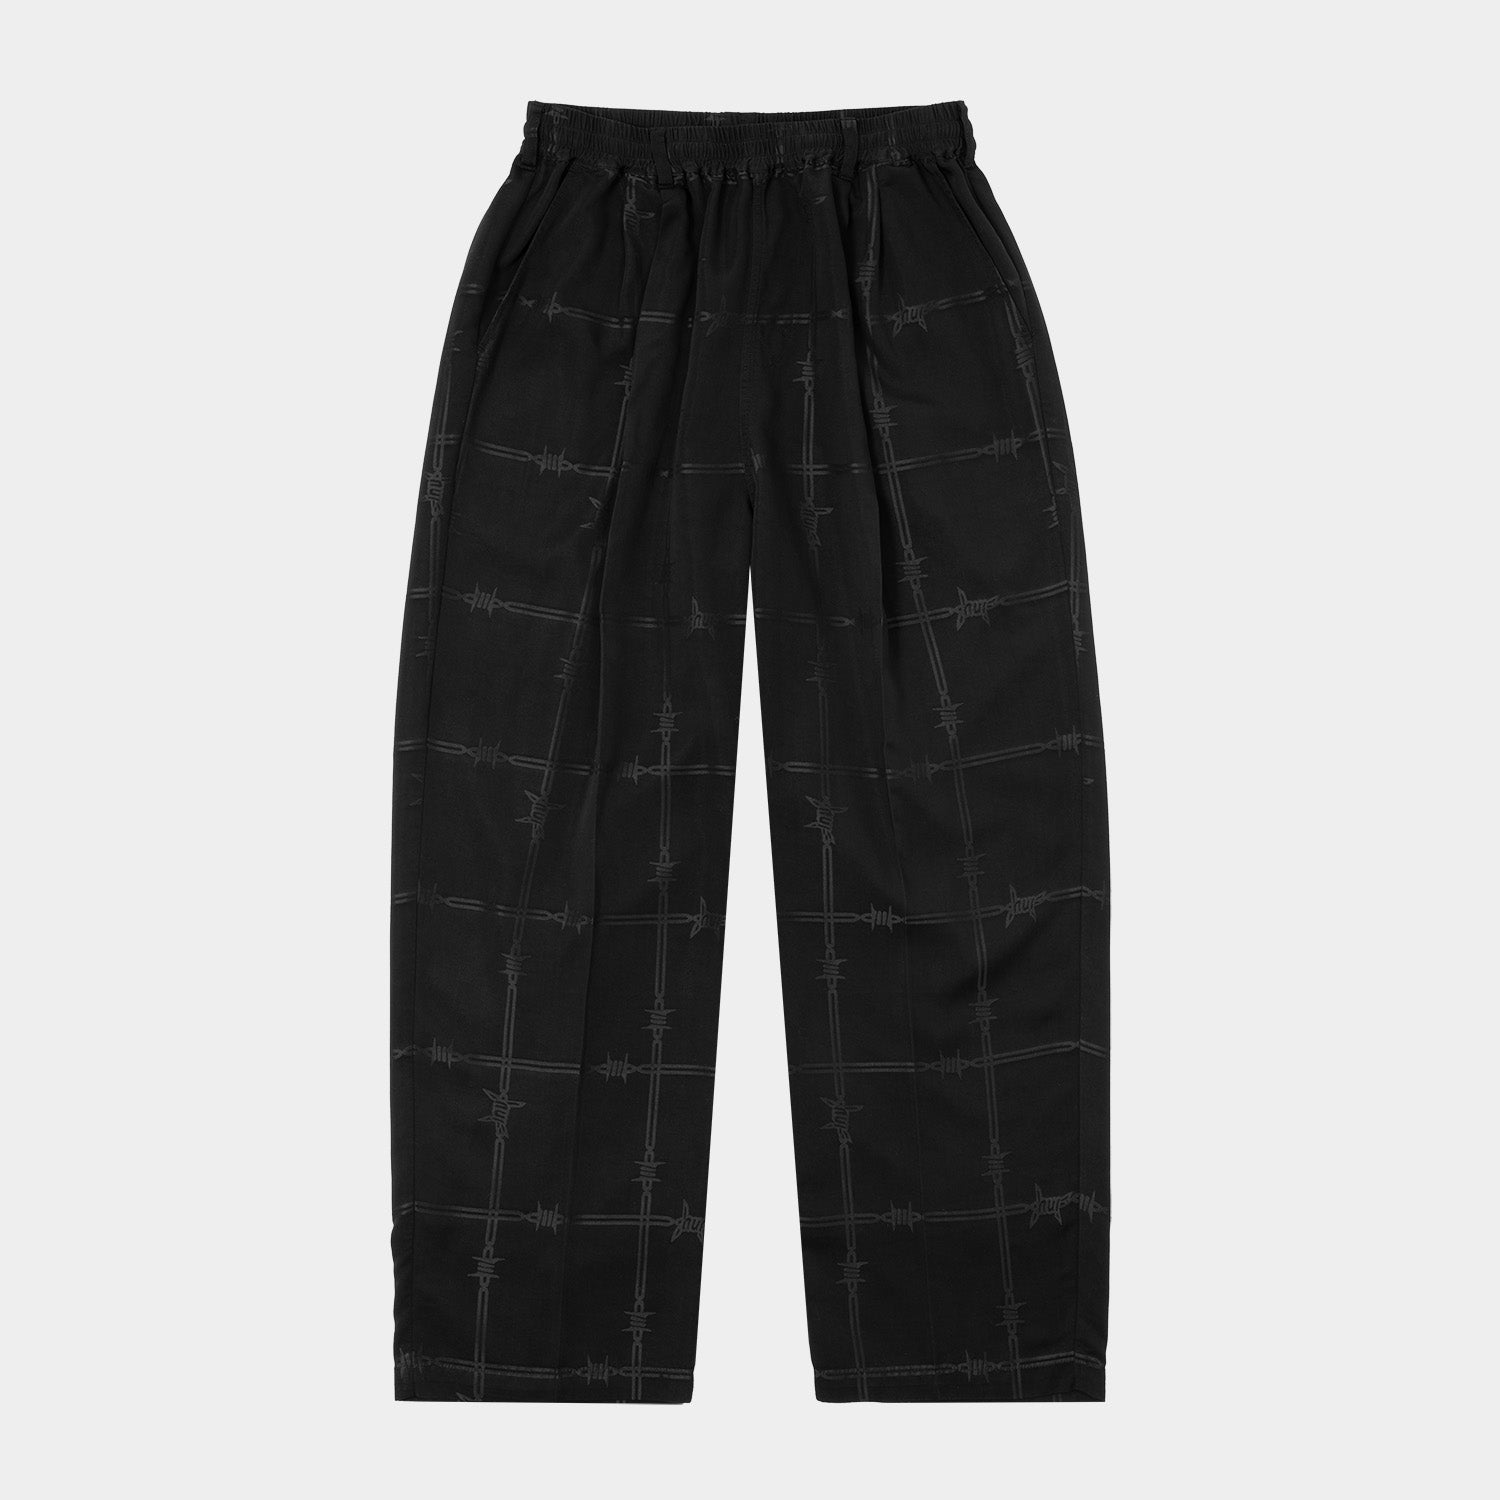 BARB WIRE PLAID EASY PANT